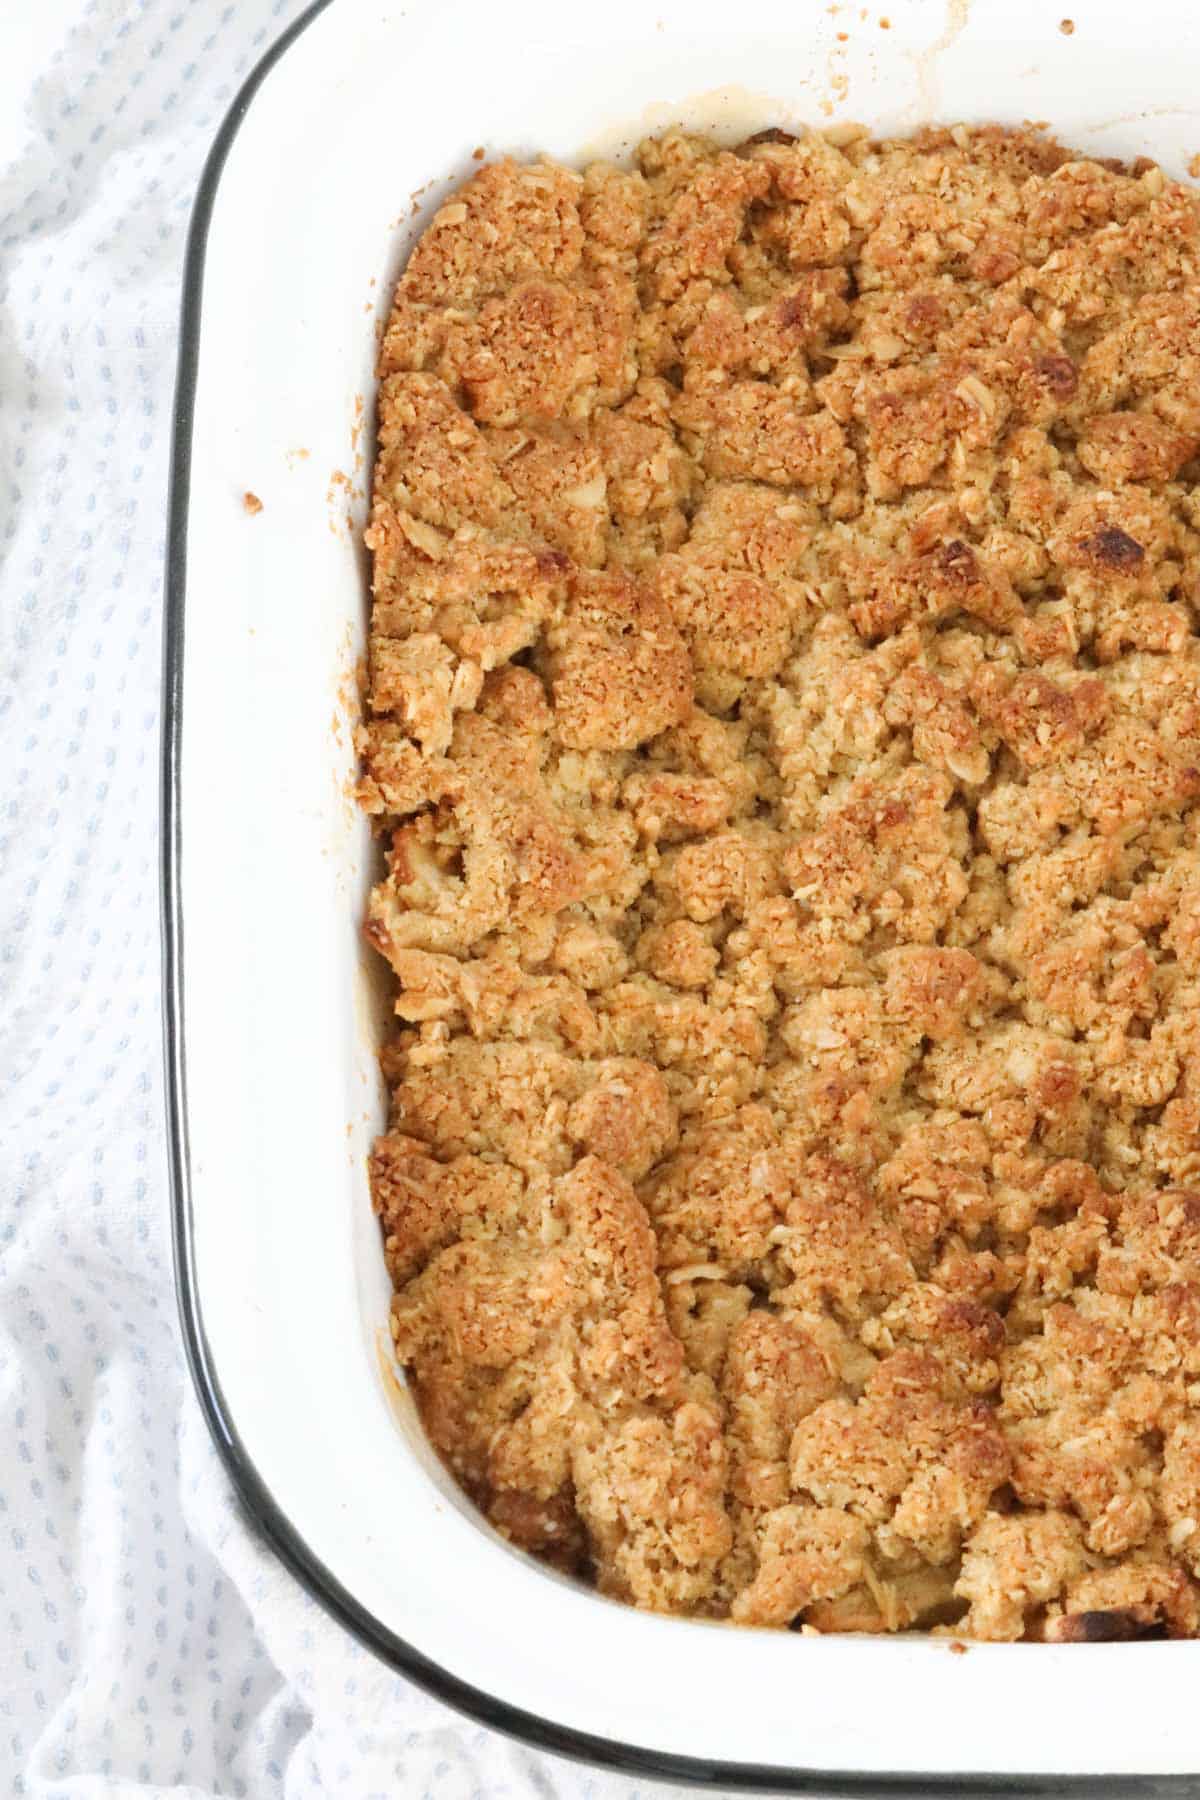 A white enamel baking dish with a golden brown Apple Crumble